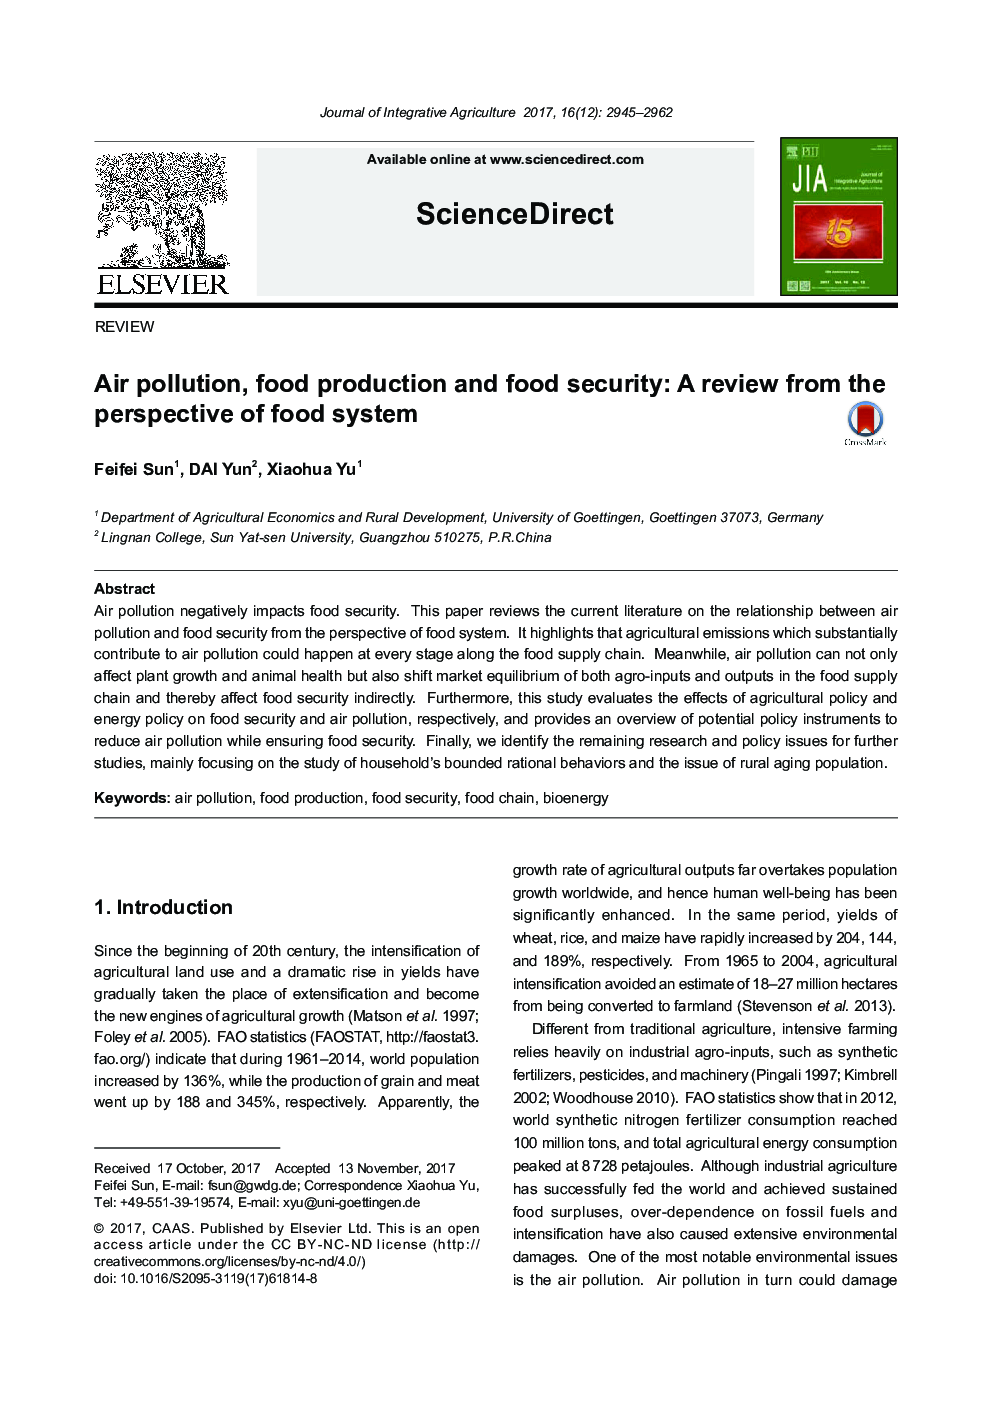 Air pollution, food production and food security: A review from the perspective of food system